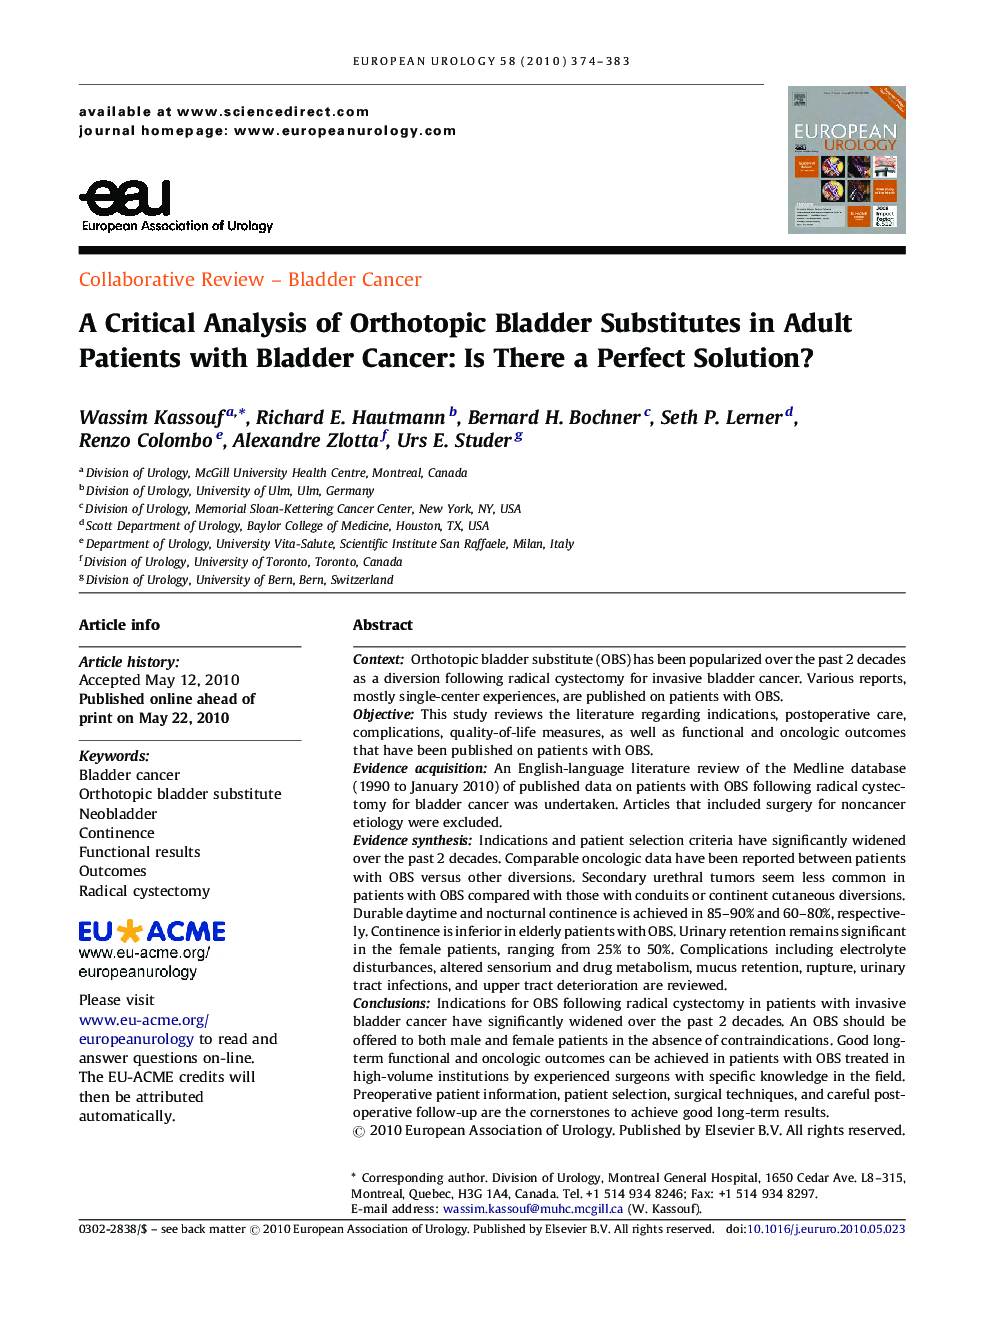 A Critical Analysis of Orthotopic Bladder Substitutes in Adult Patients with Bladder Cancer: Is There a Perfect Solution? 